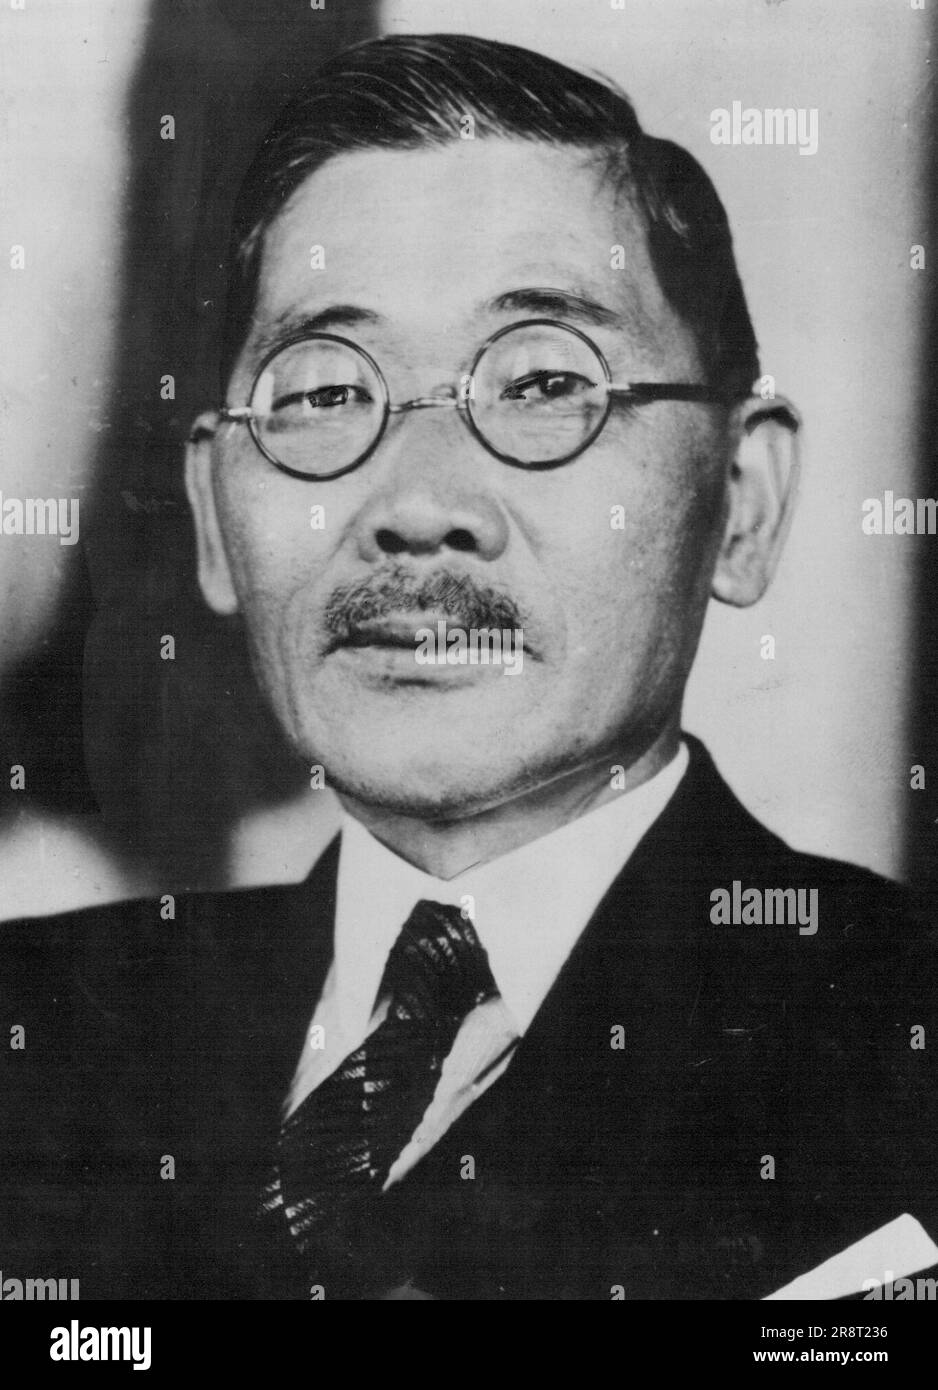 New Japanese Foreign Minister -- Shigenori Togo, (above), Foreign Minister in the new cabinet headed by general Eiki Tojo, was former ambassador to Russia, and before that ambassador to Germany. October 18, 1941. (Photo by ACME). Stock Photo